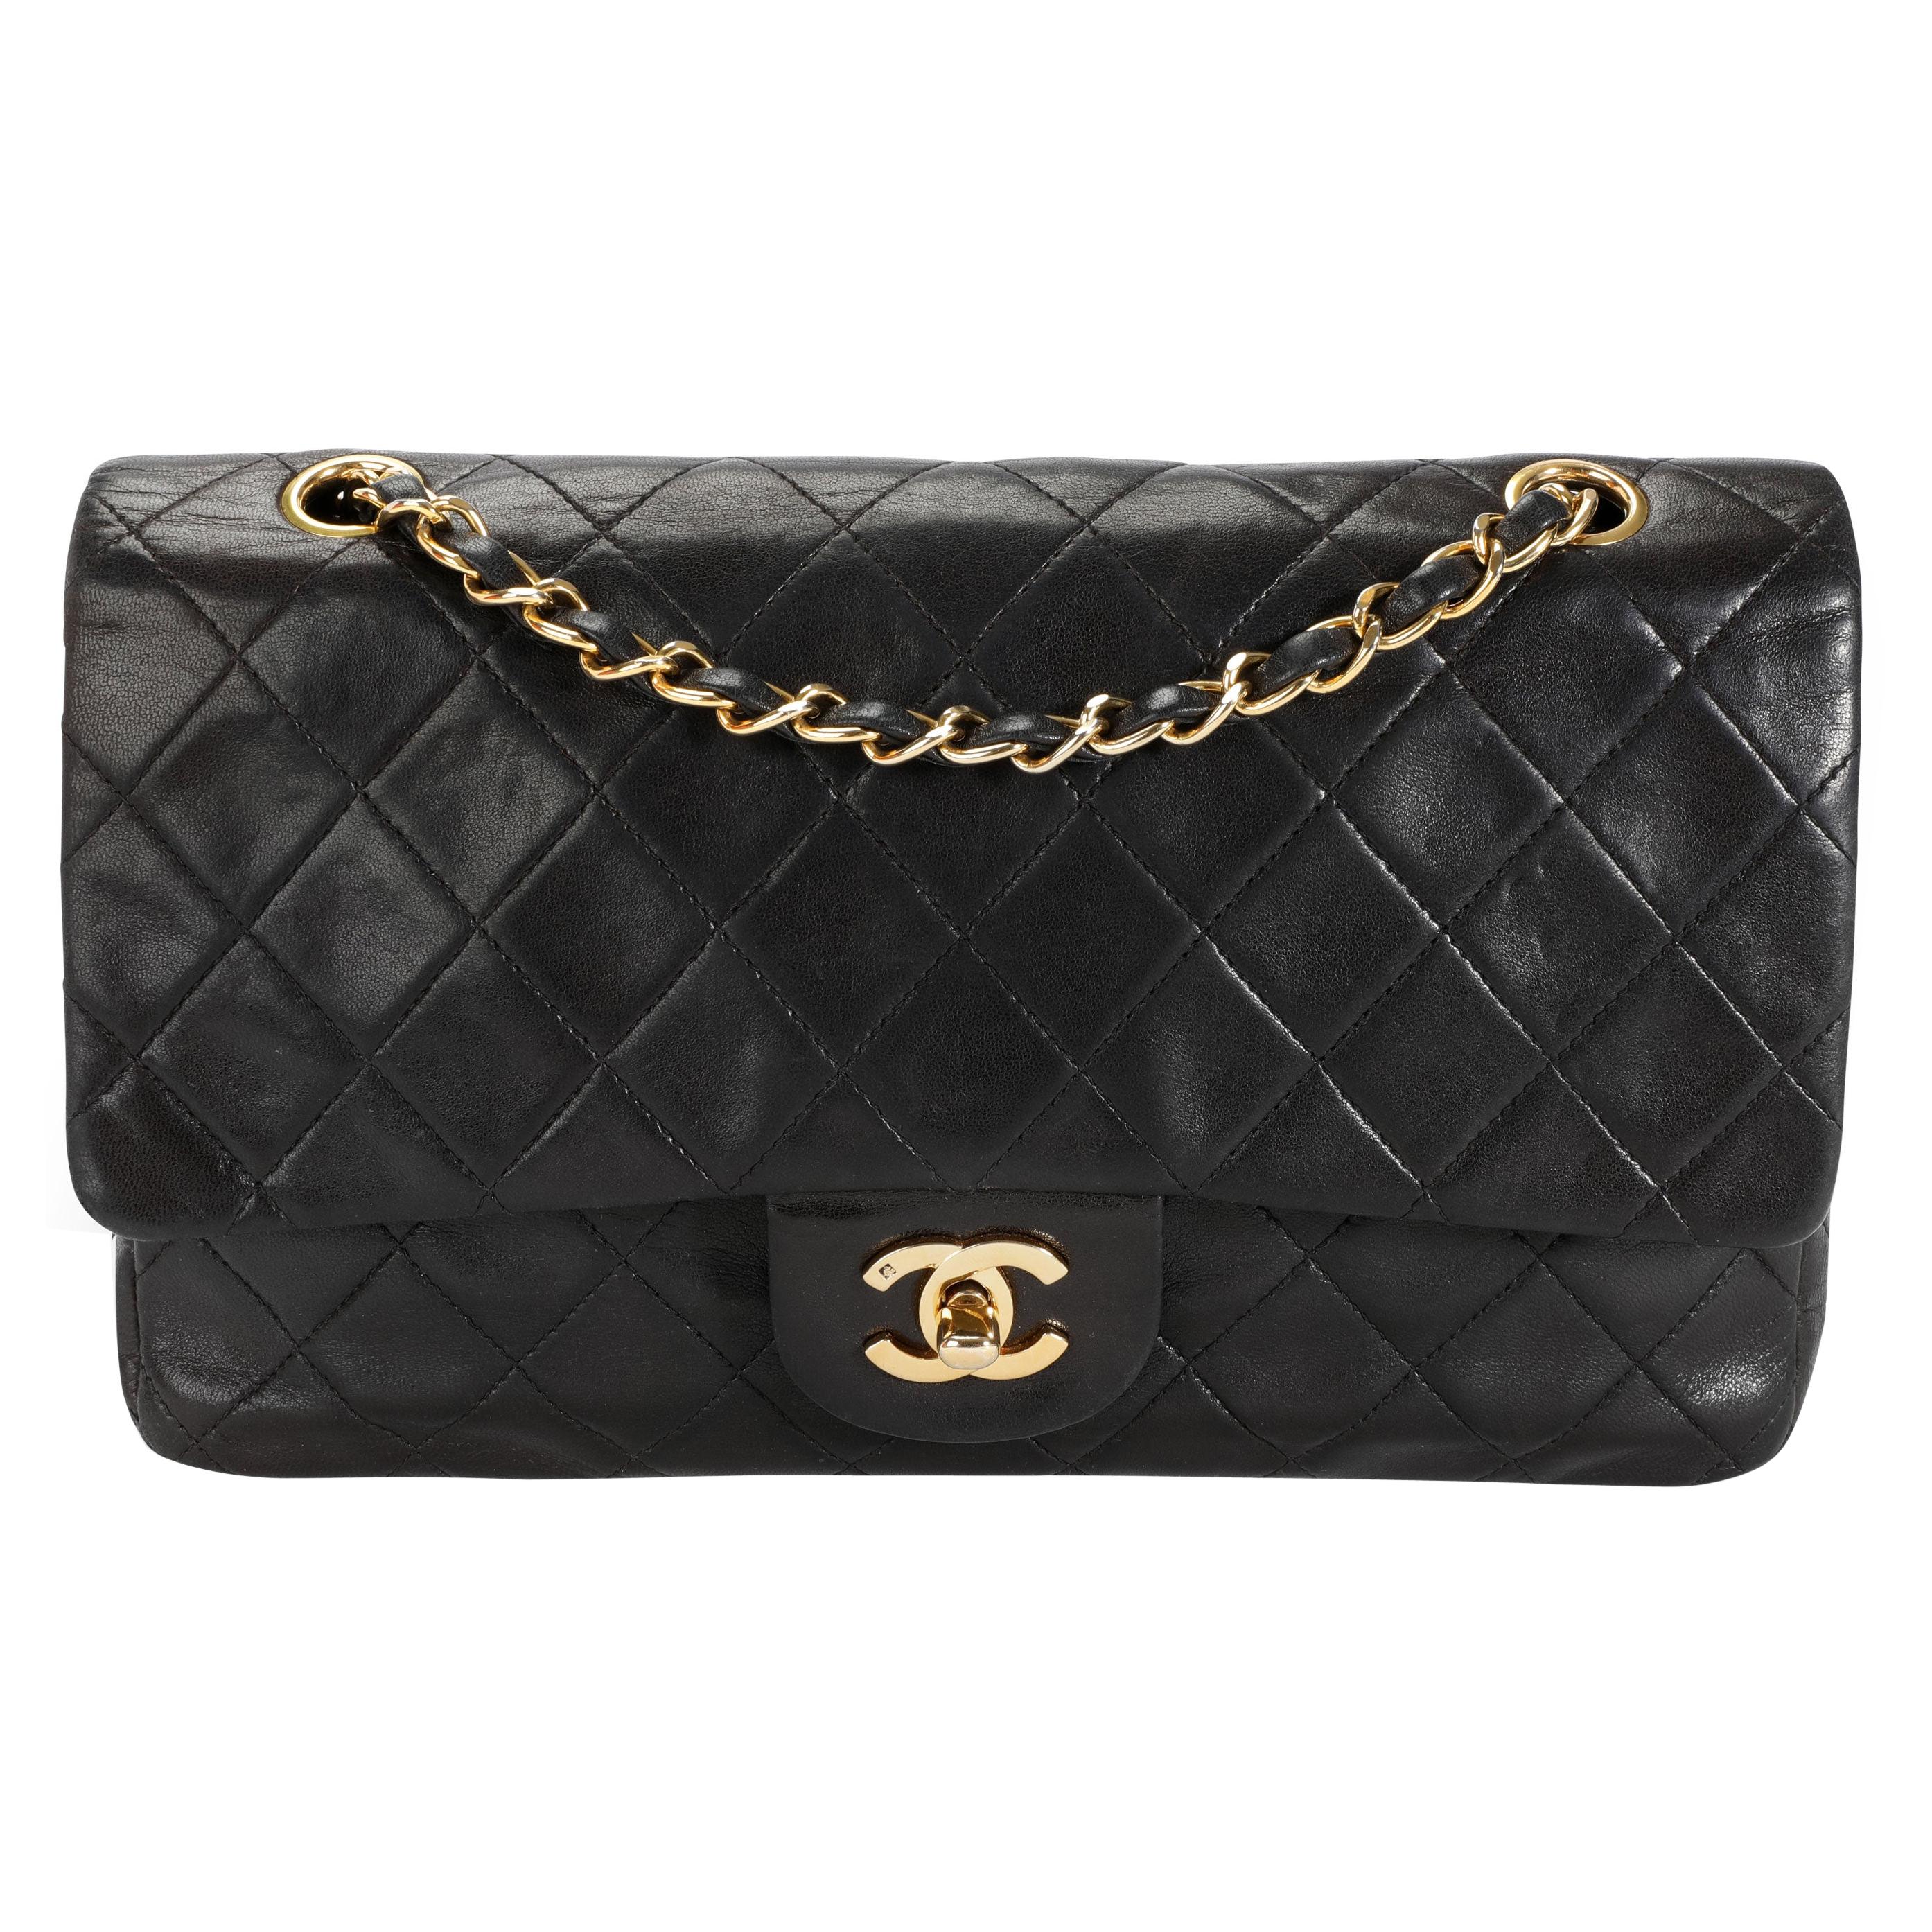 Chanel Vintage Black Quilted Lambskin Medium Classic Double Flap Bag